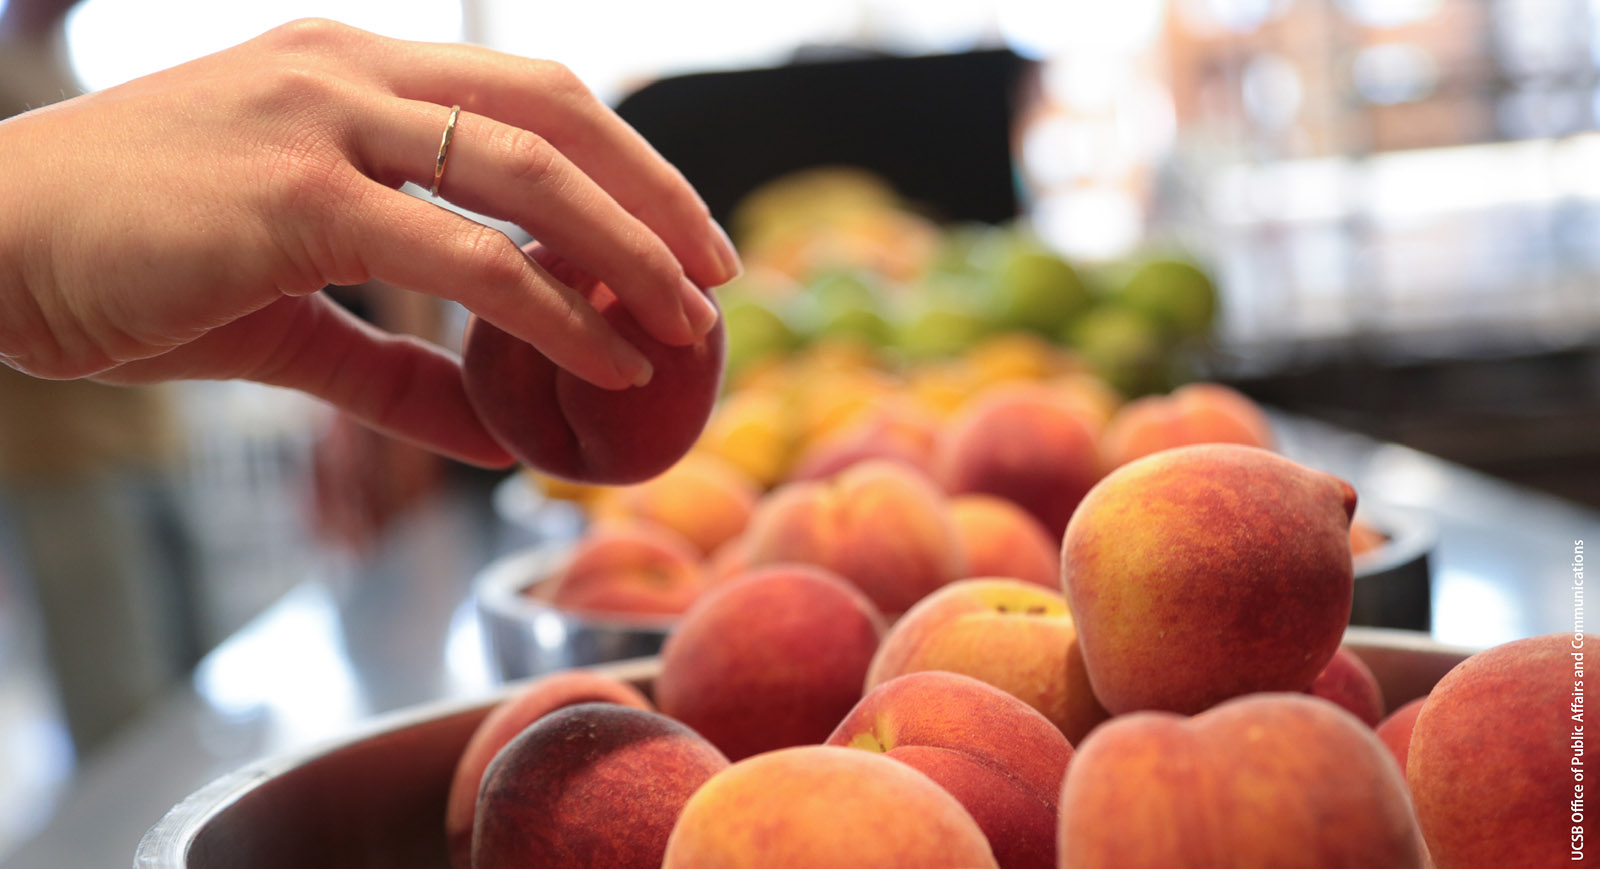 Locally grown peaches are served in the dining commons at UC Santa Barbara.